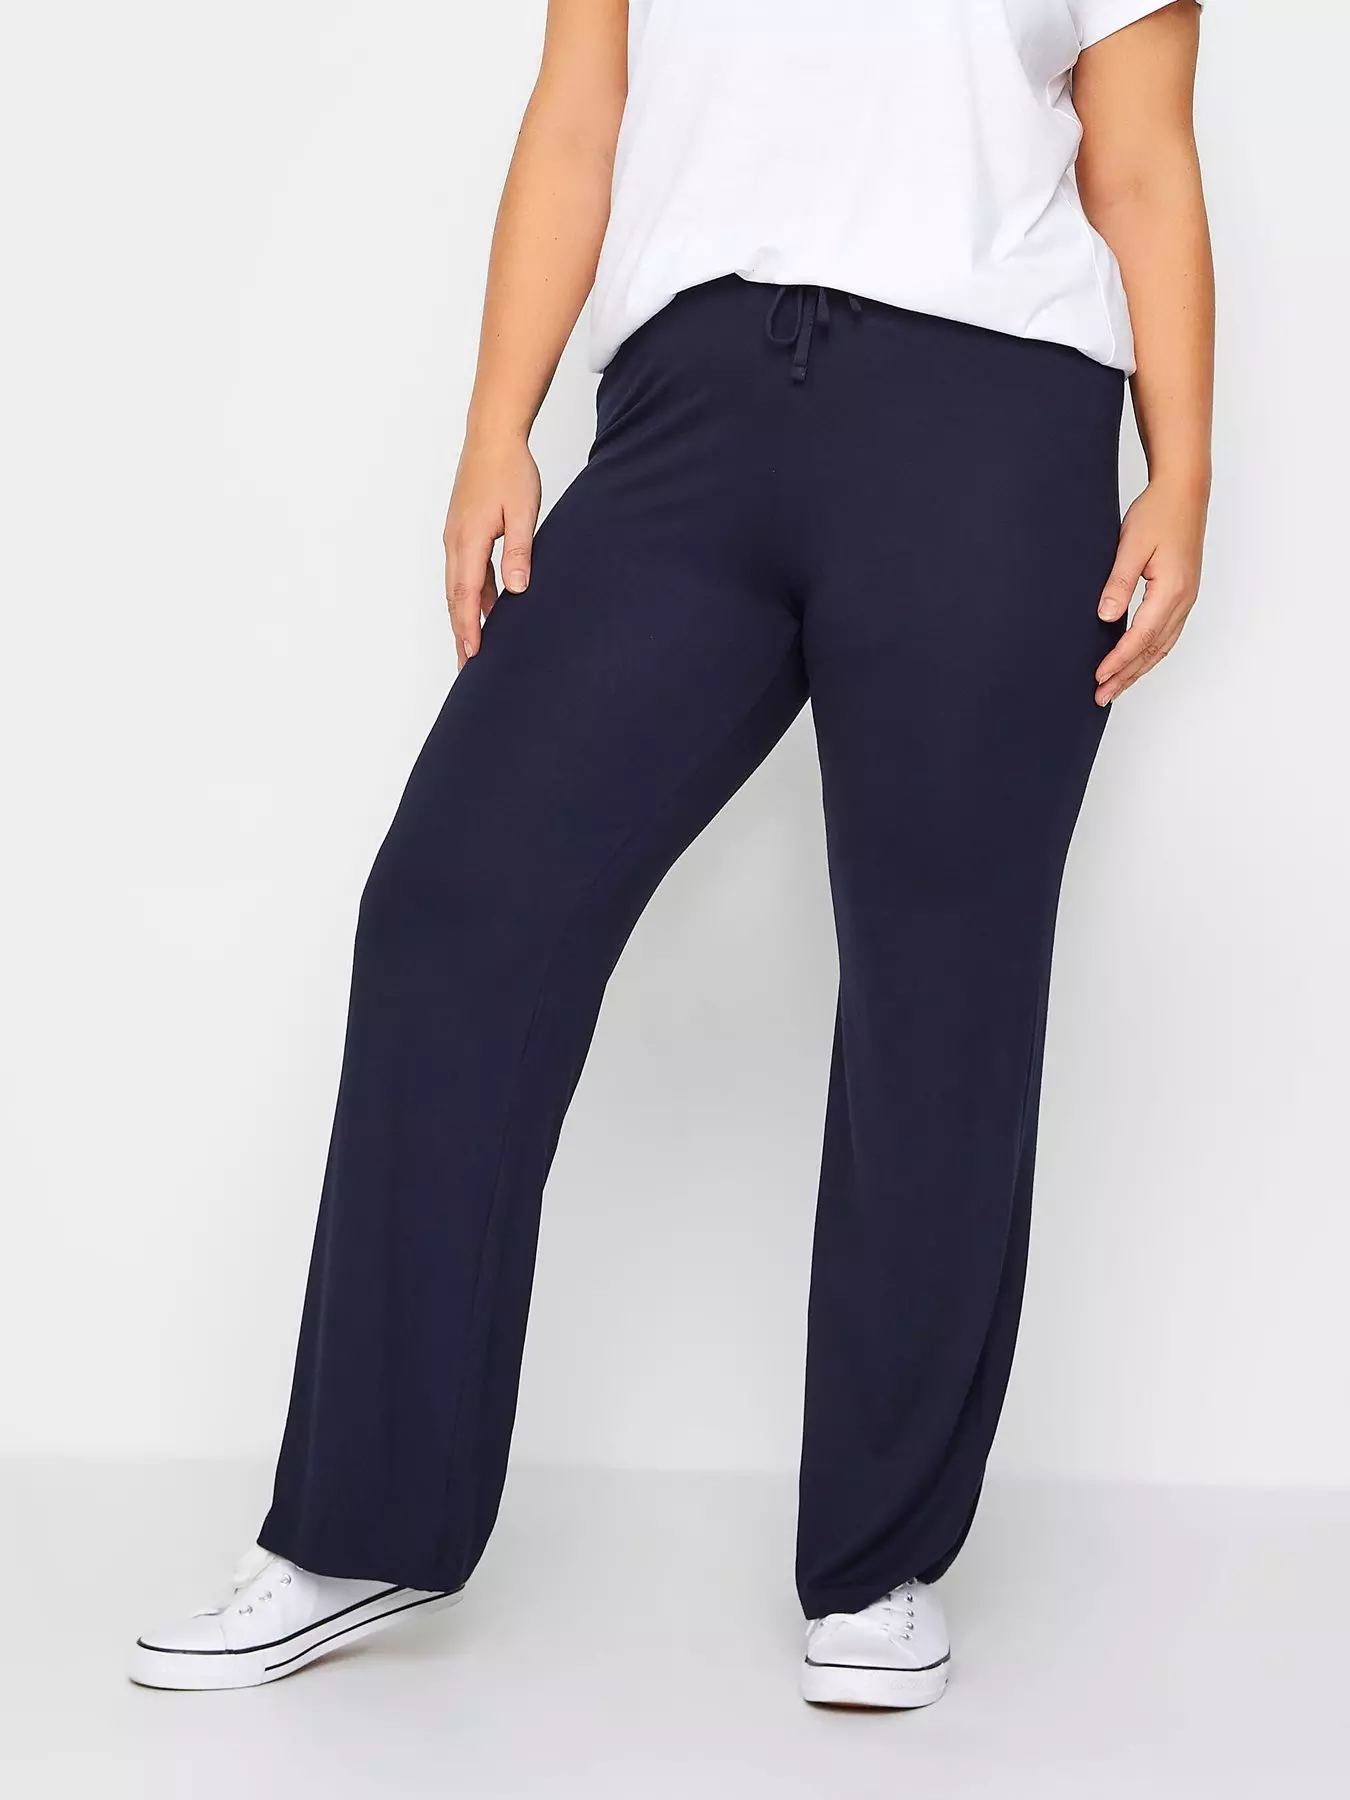 YOURS Plus Size Navy Blue Side Stripe Straight Leg Joggers